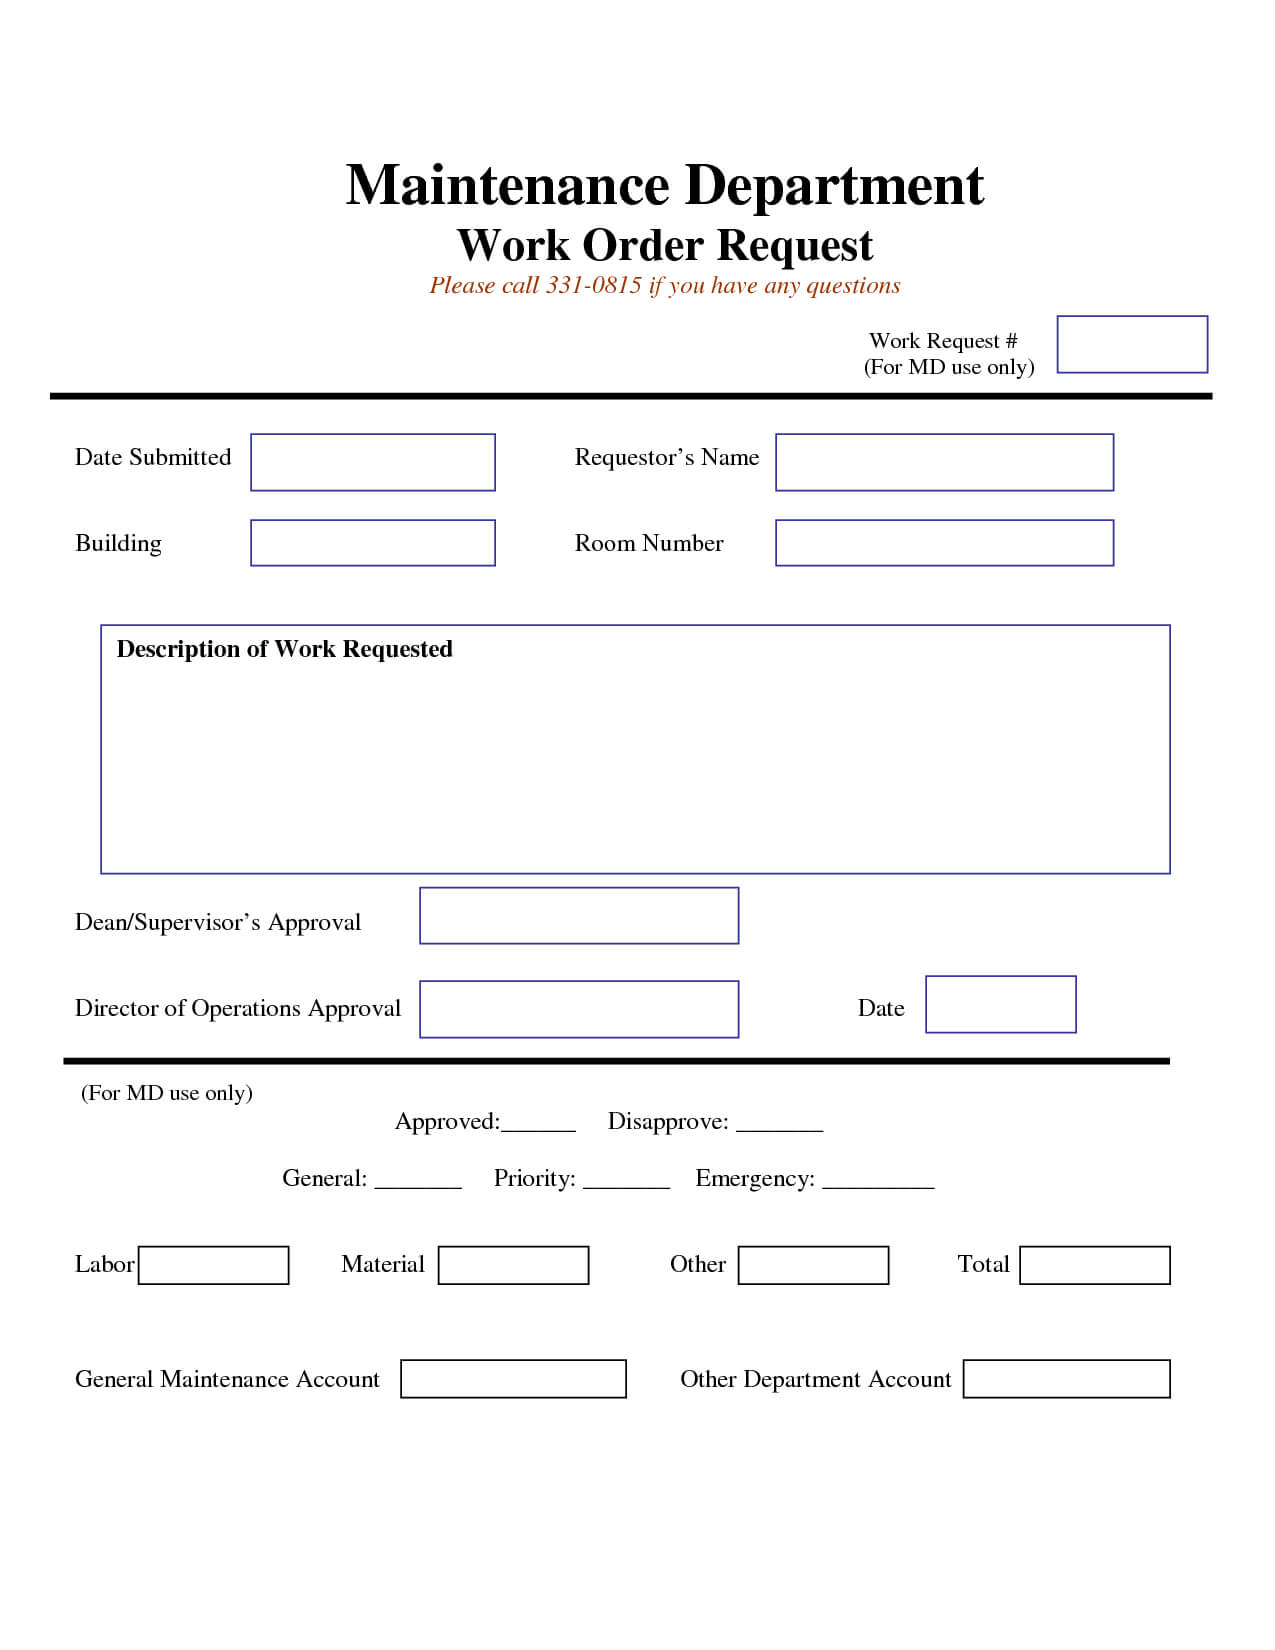 Work Request Form | Maintenance Work Order Request Form Pertaining To Maintenance Job Card Template